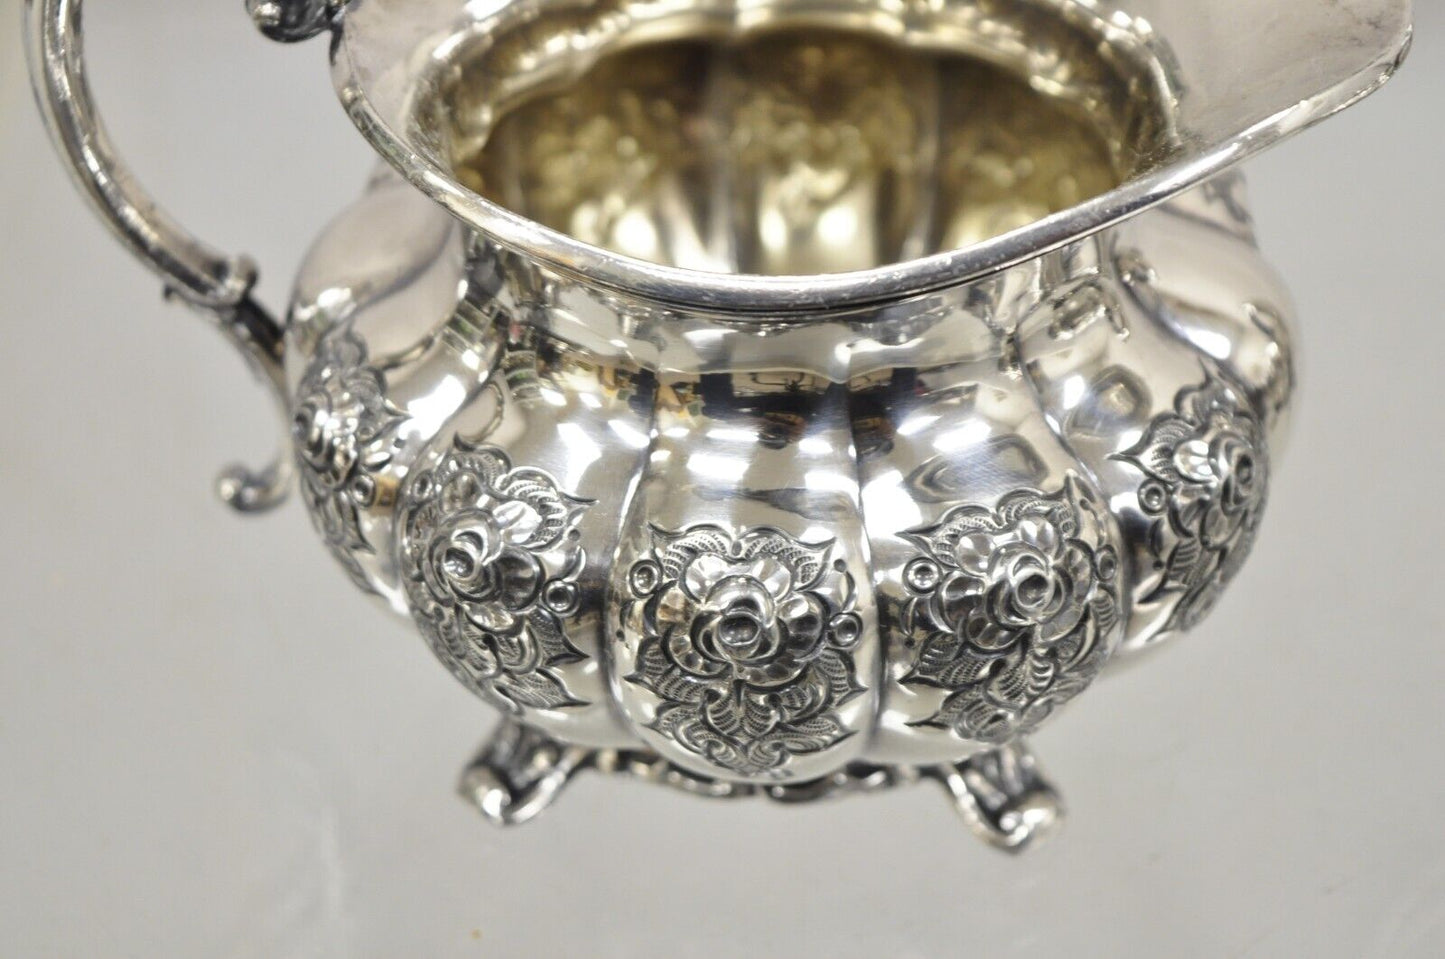 Vintage Victorian 1881 Rogers Canada Silver Plated Sugar Bowl and Creamer Set